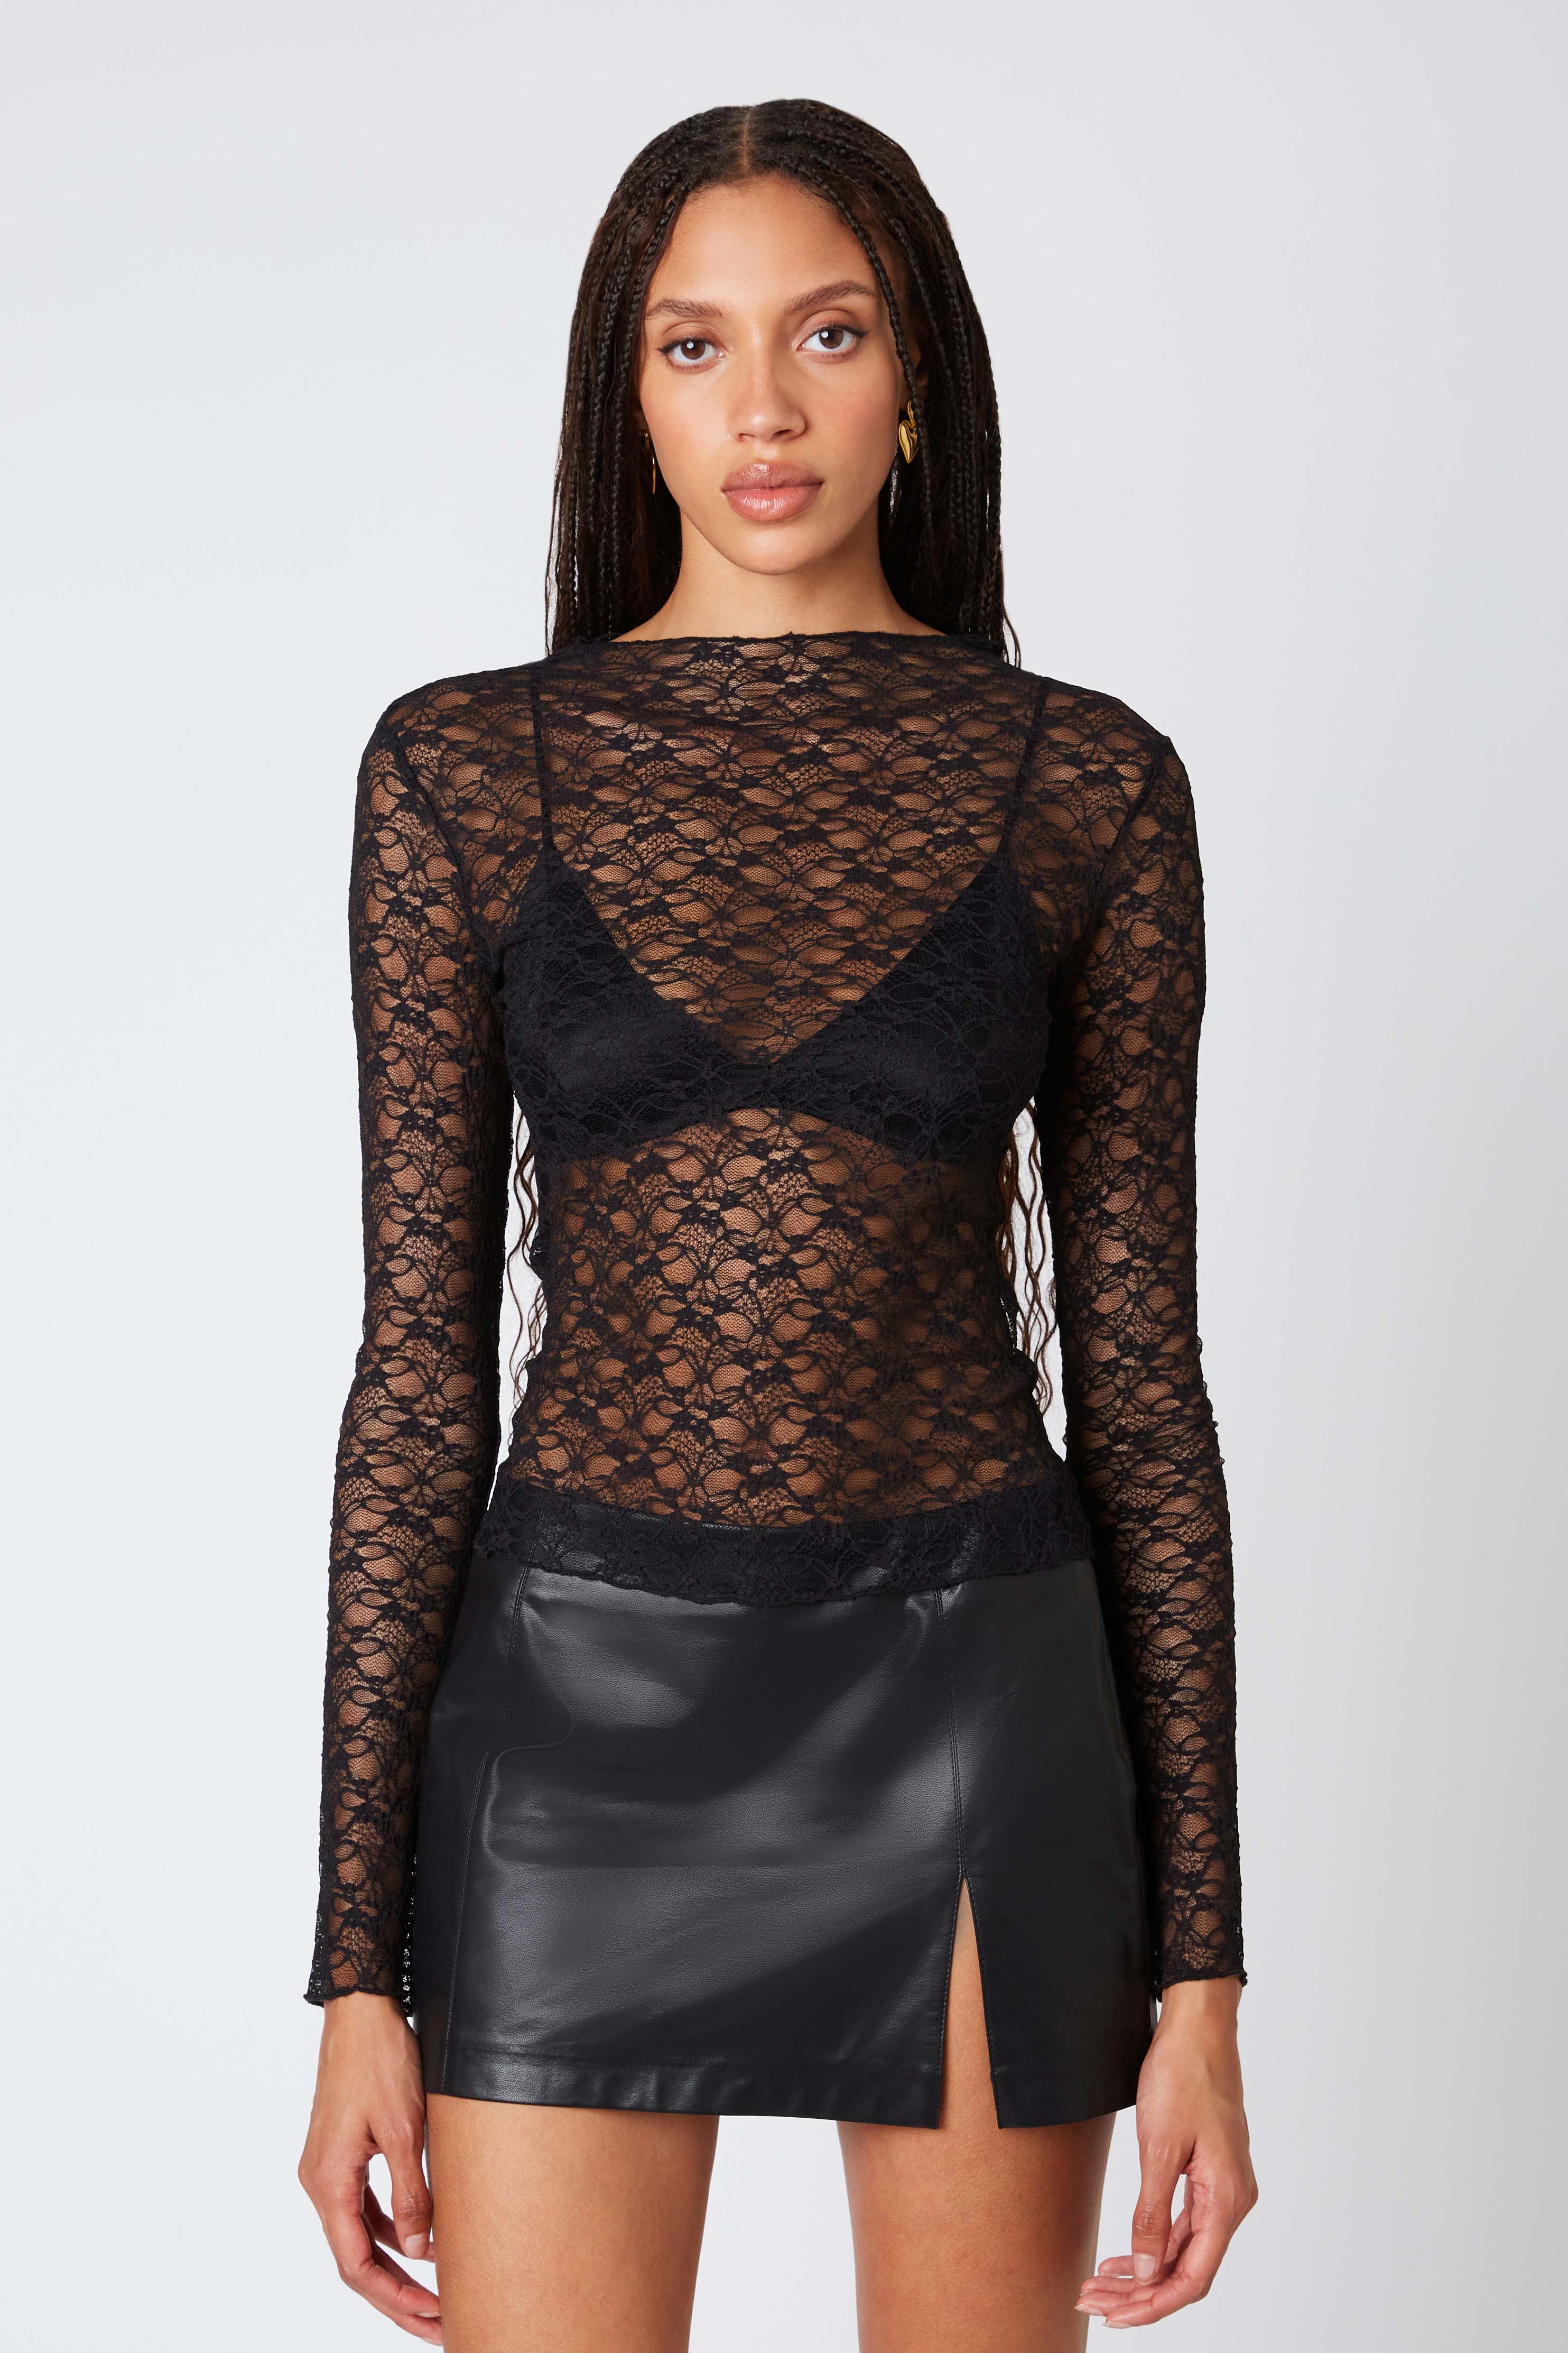 Floral Lace Long Sleeve in Black Front View